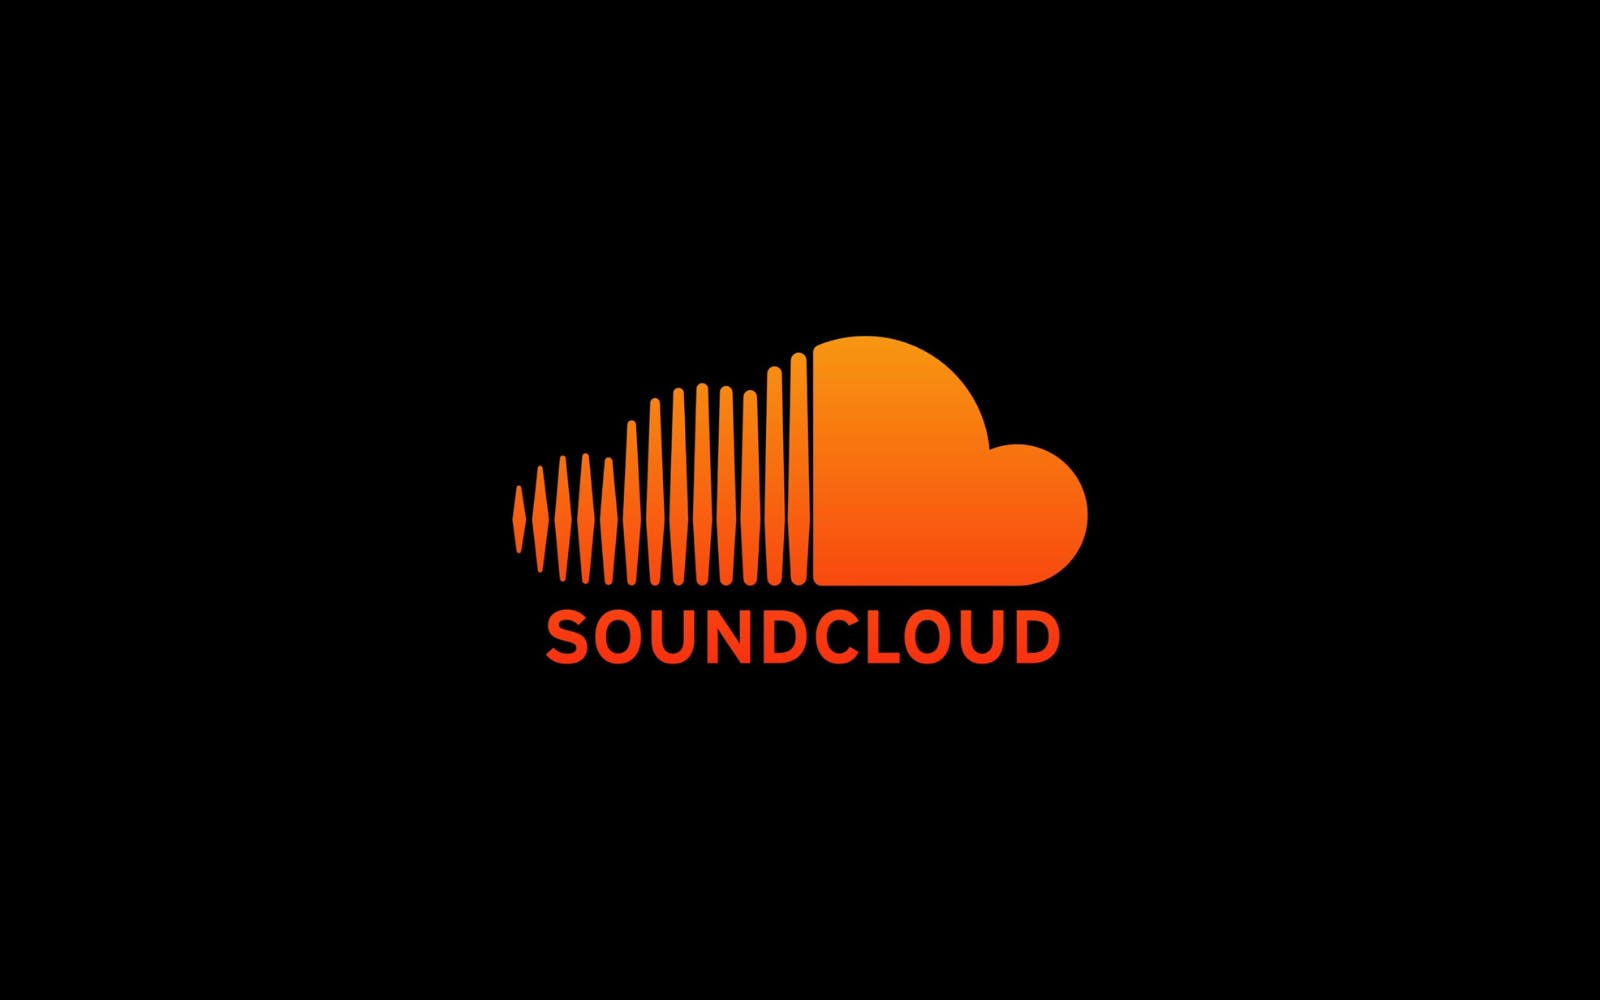 How to get more plays on SoundCloud